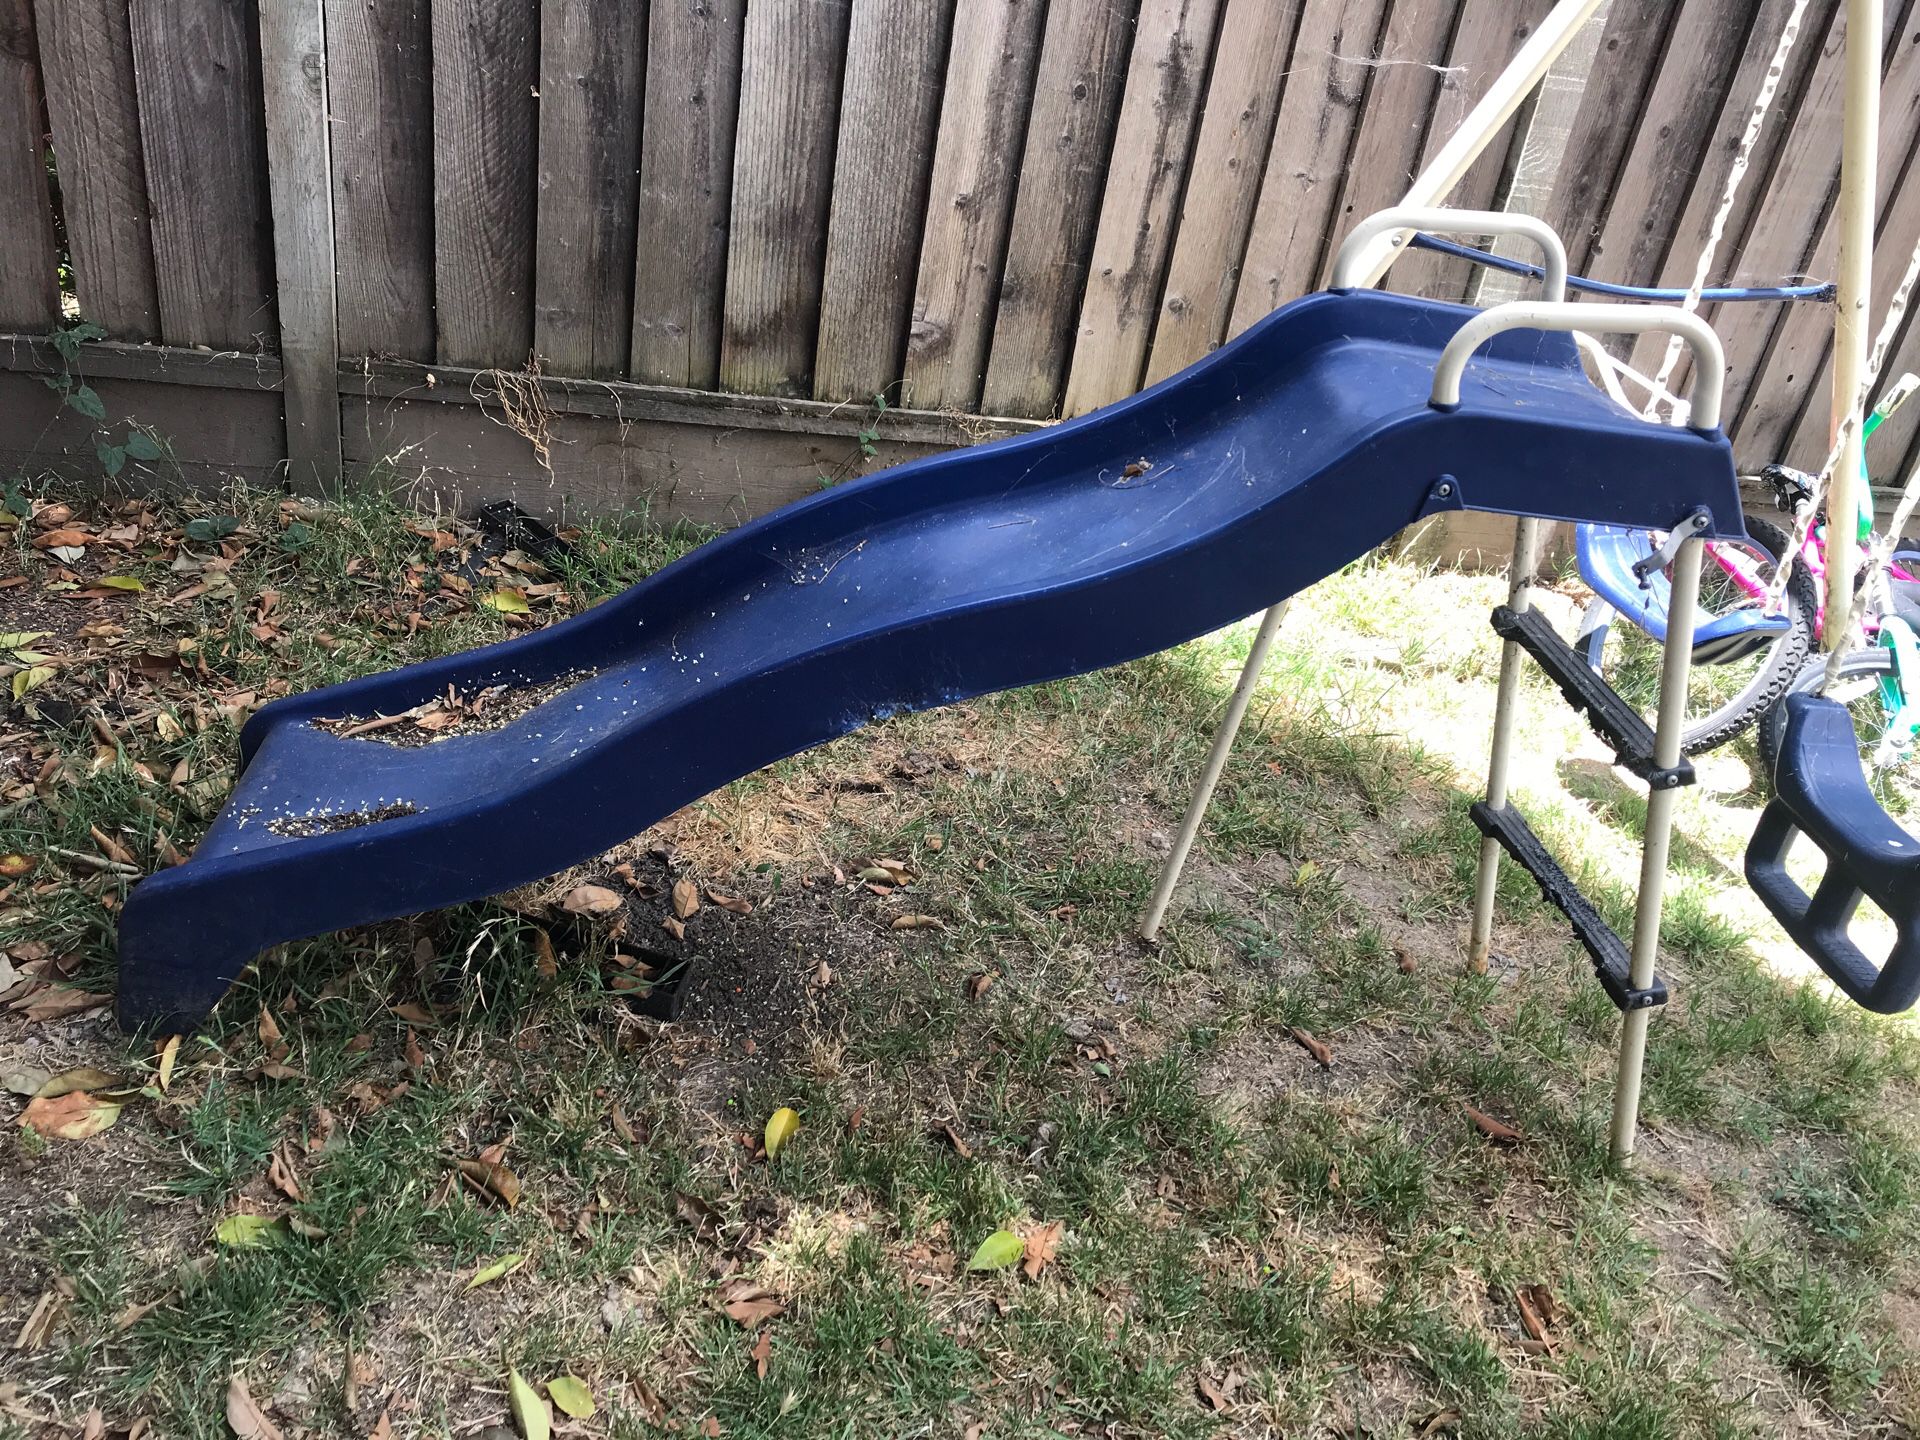 Swing set and Mary go round $30 must go great condition!